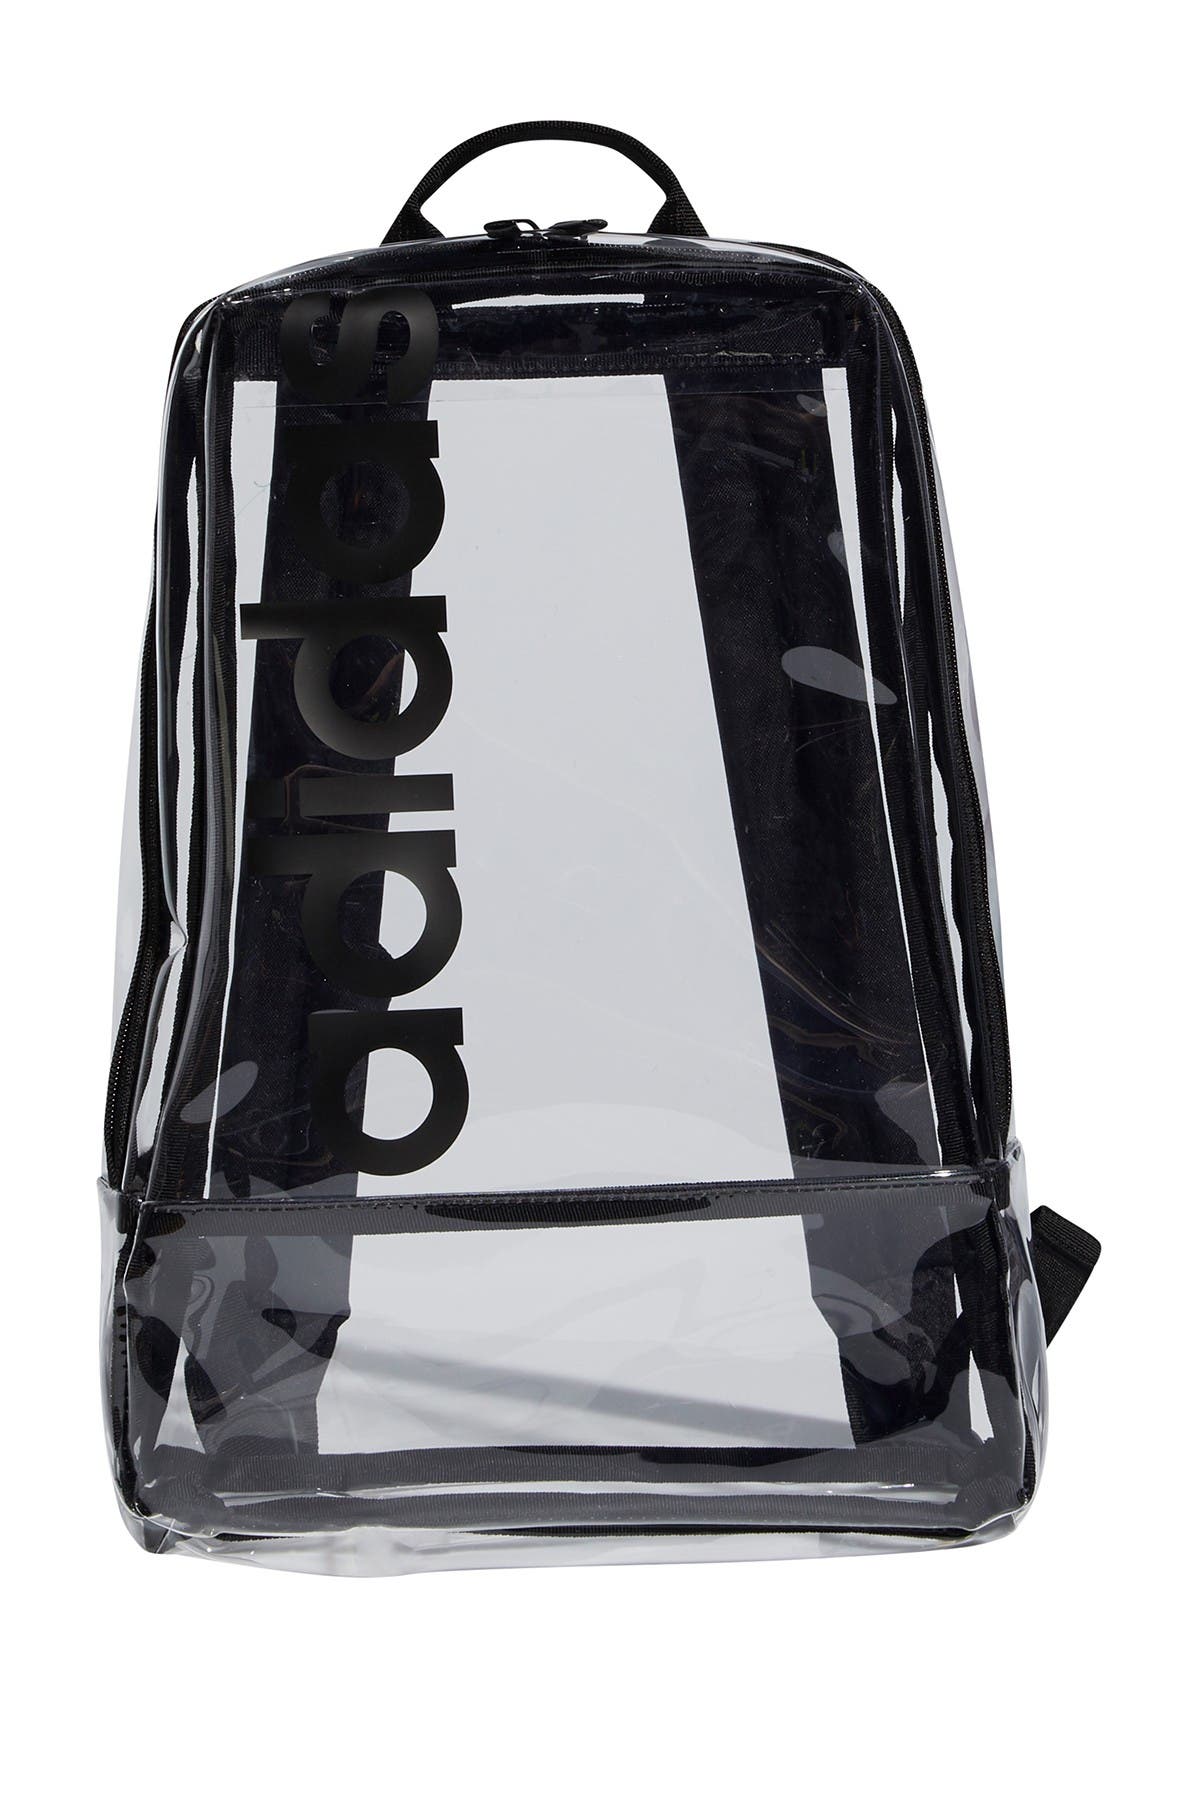 Adidas Originals Logo Clear Backpack In Clear/ Black